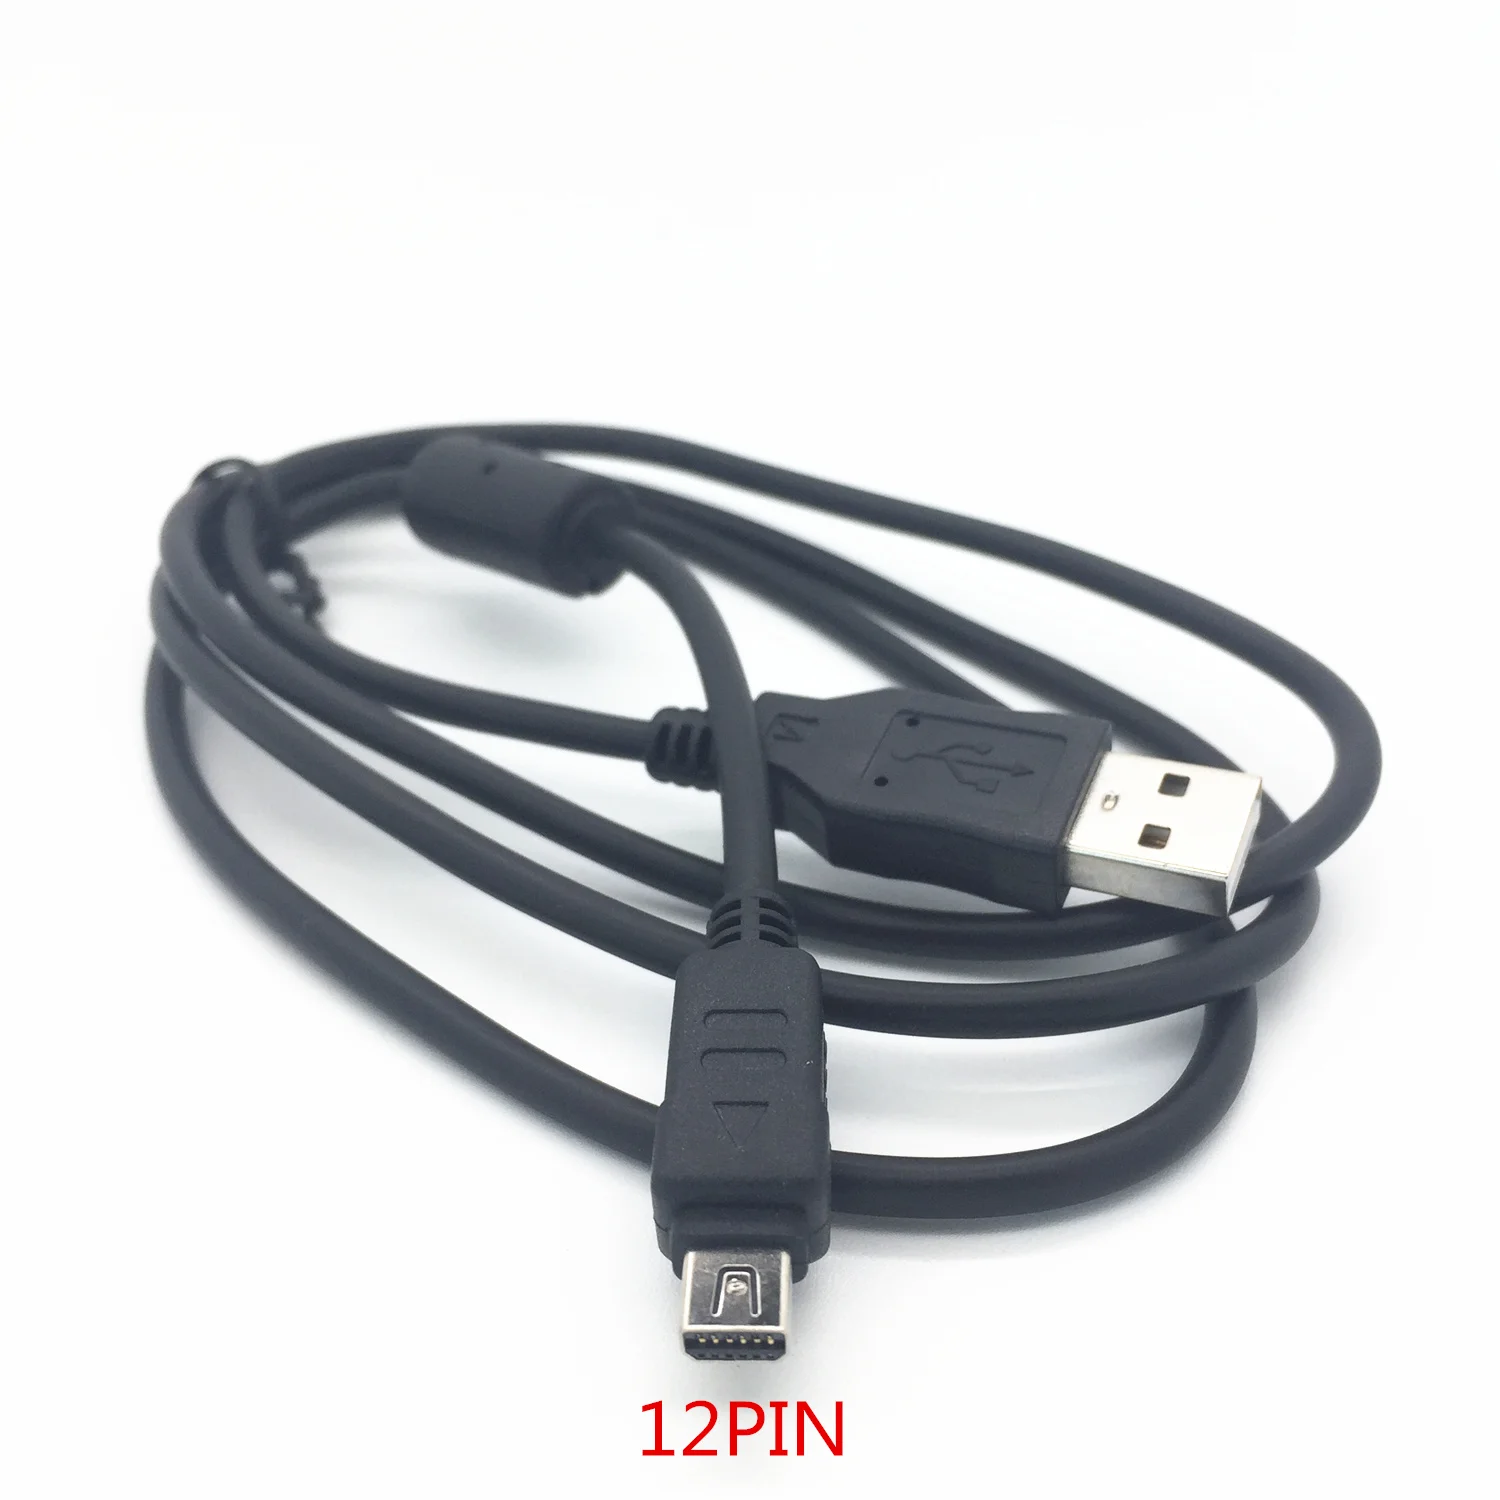 1.5M USB Data Cable for Olympus SP Series SP-310/ SP-320/ SP-350/ SP-500 UZ/  SP-510 / SP-550 / SP-560 / SP-570/ SP-590 UZ/SP-700 - AliExpress